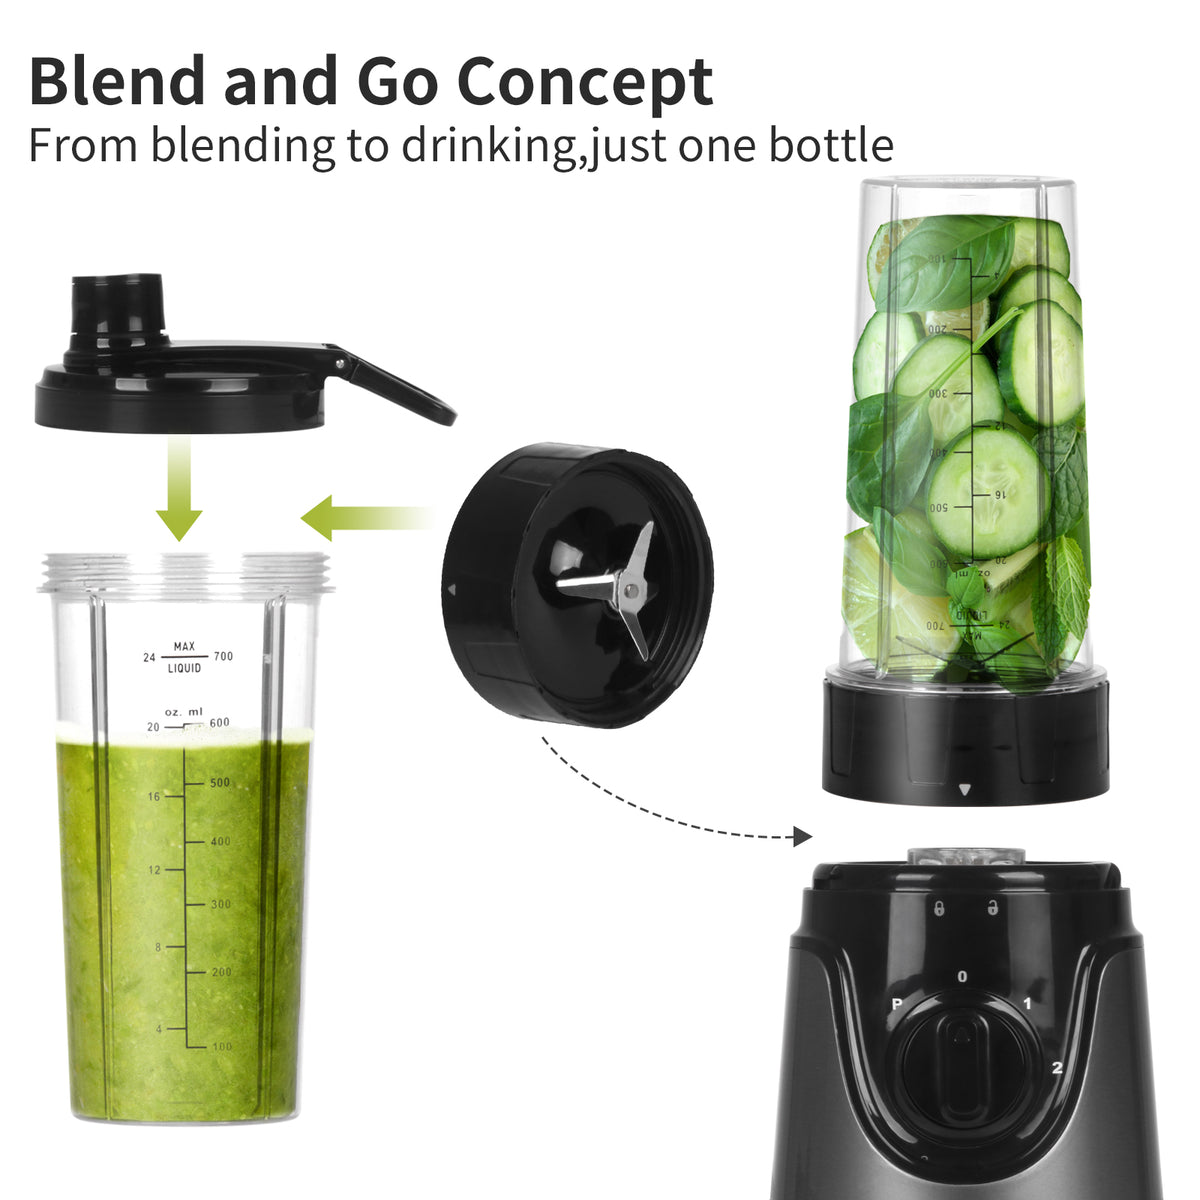 La Reveuse Smoothie Blender Personal Size 300 Watts with 2 Pieces